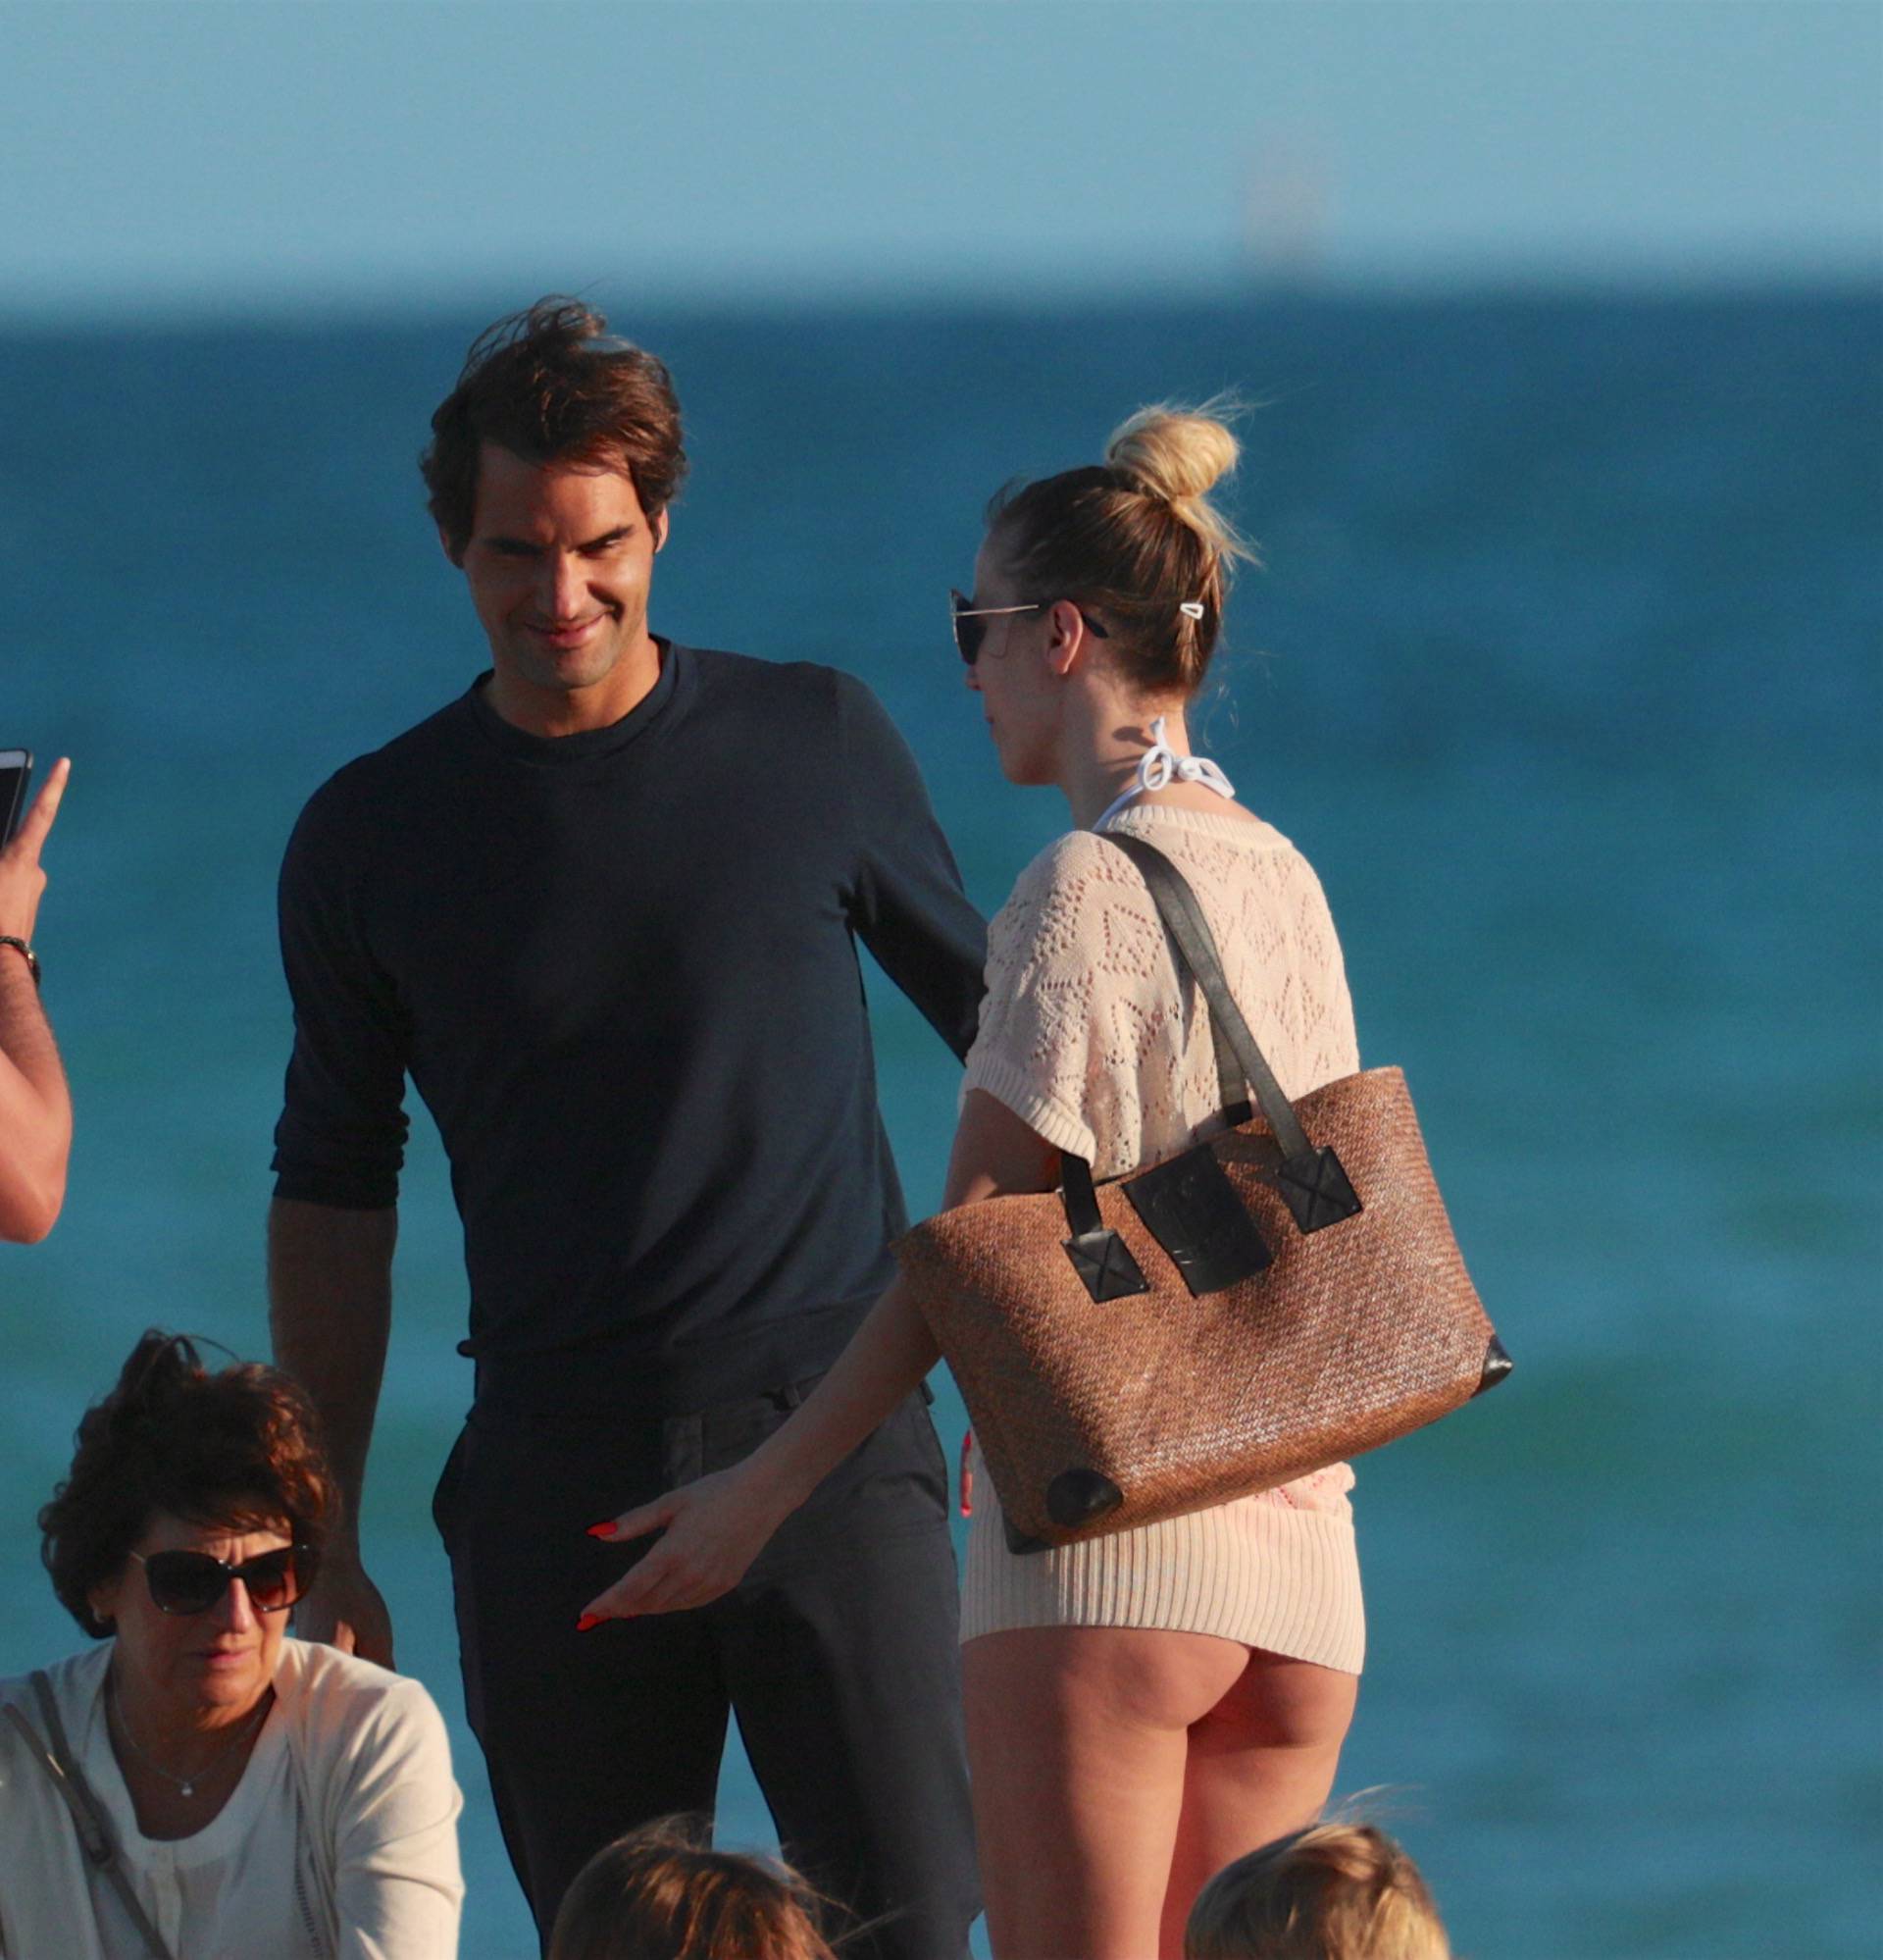 Roger Federer takes selfies with scantily clad woman